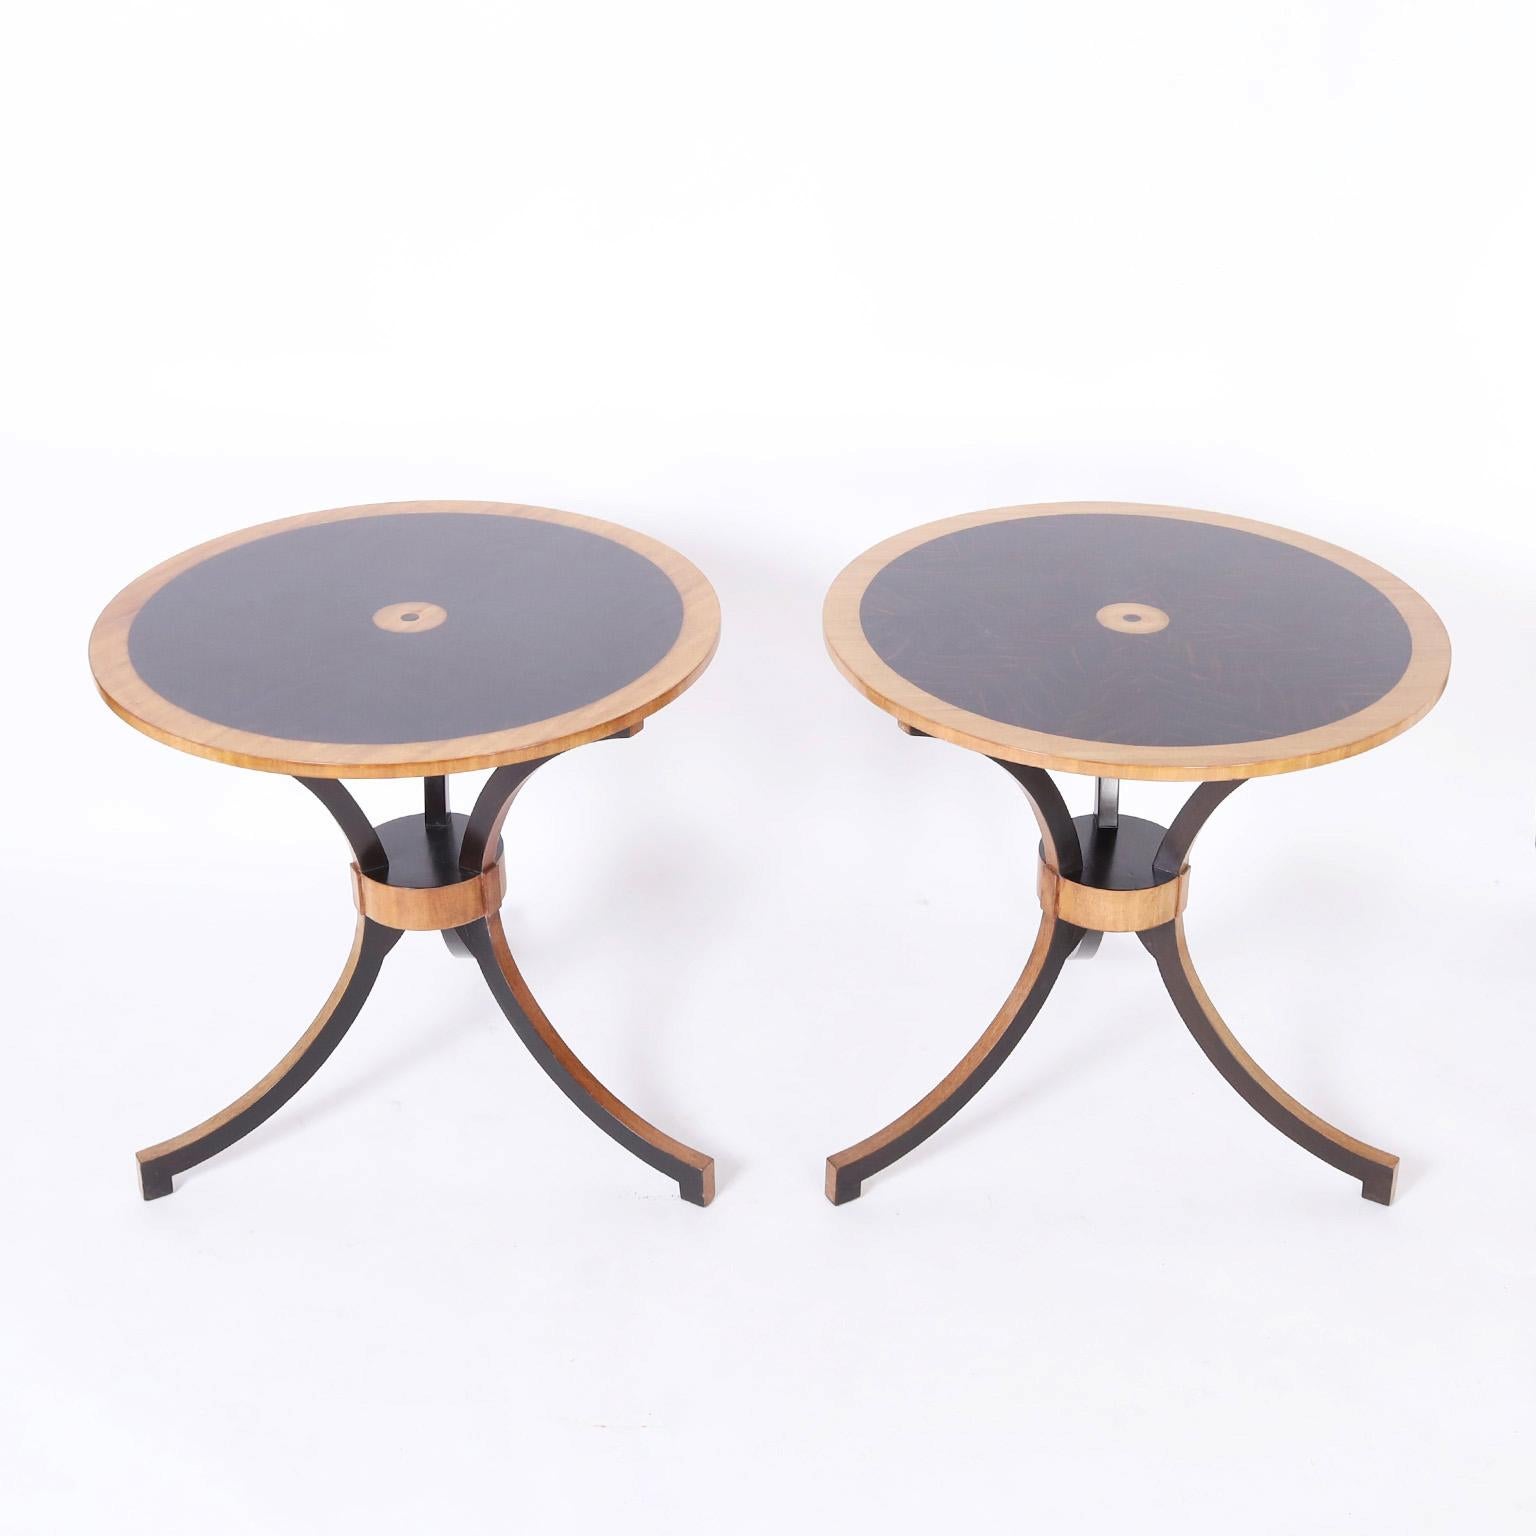 Dashing pair of midcentury tables crafted in bleached mahogany in a neoclassic form with a Biedermeier influenced pallet having round tops painted and decorated with a center medallion on a stylized hourglass form base.